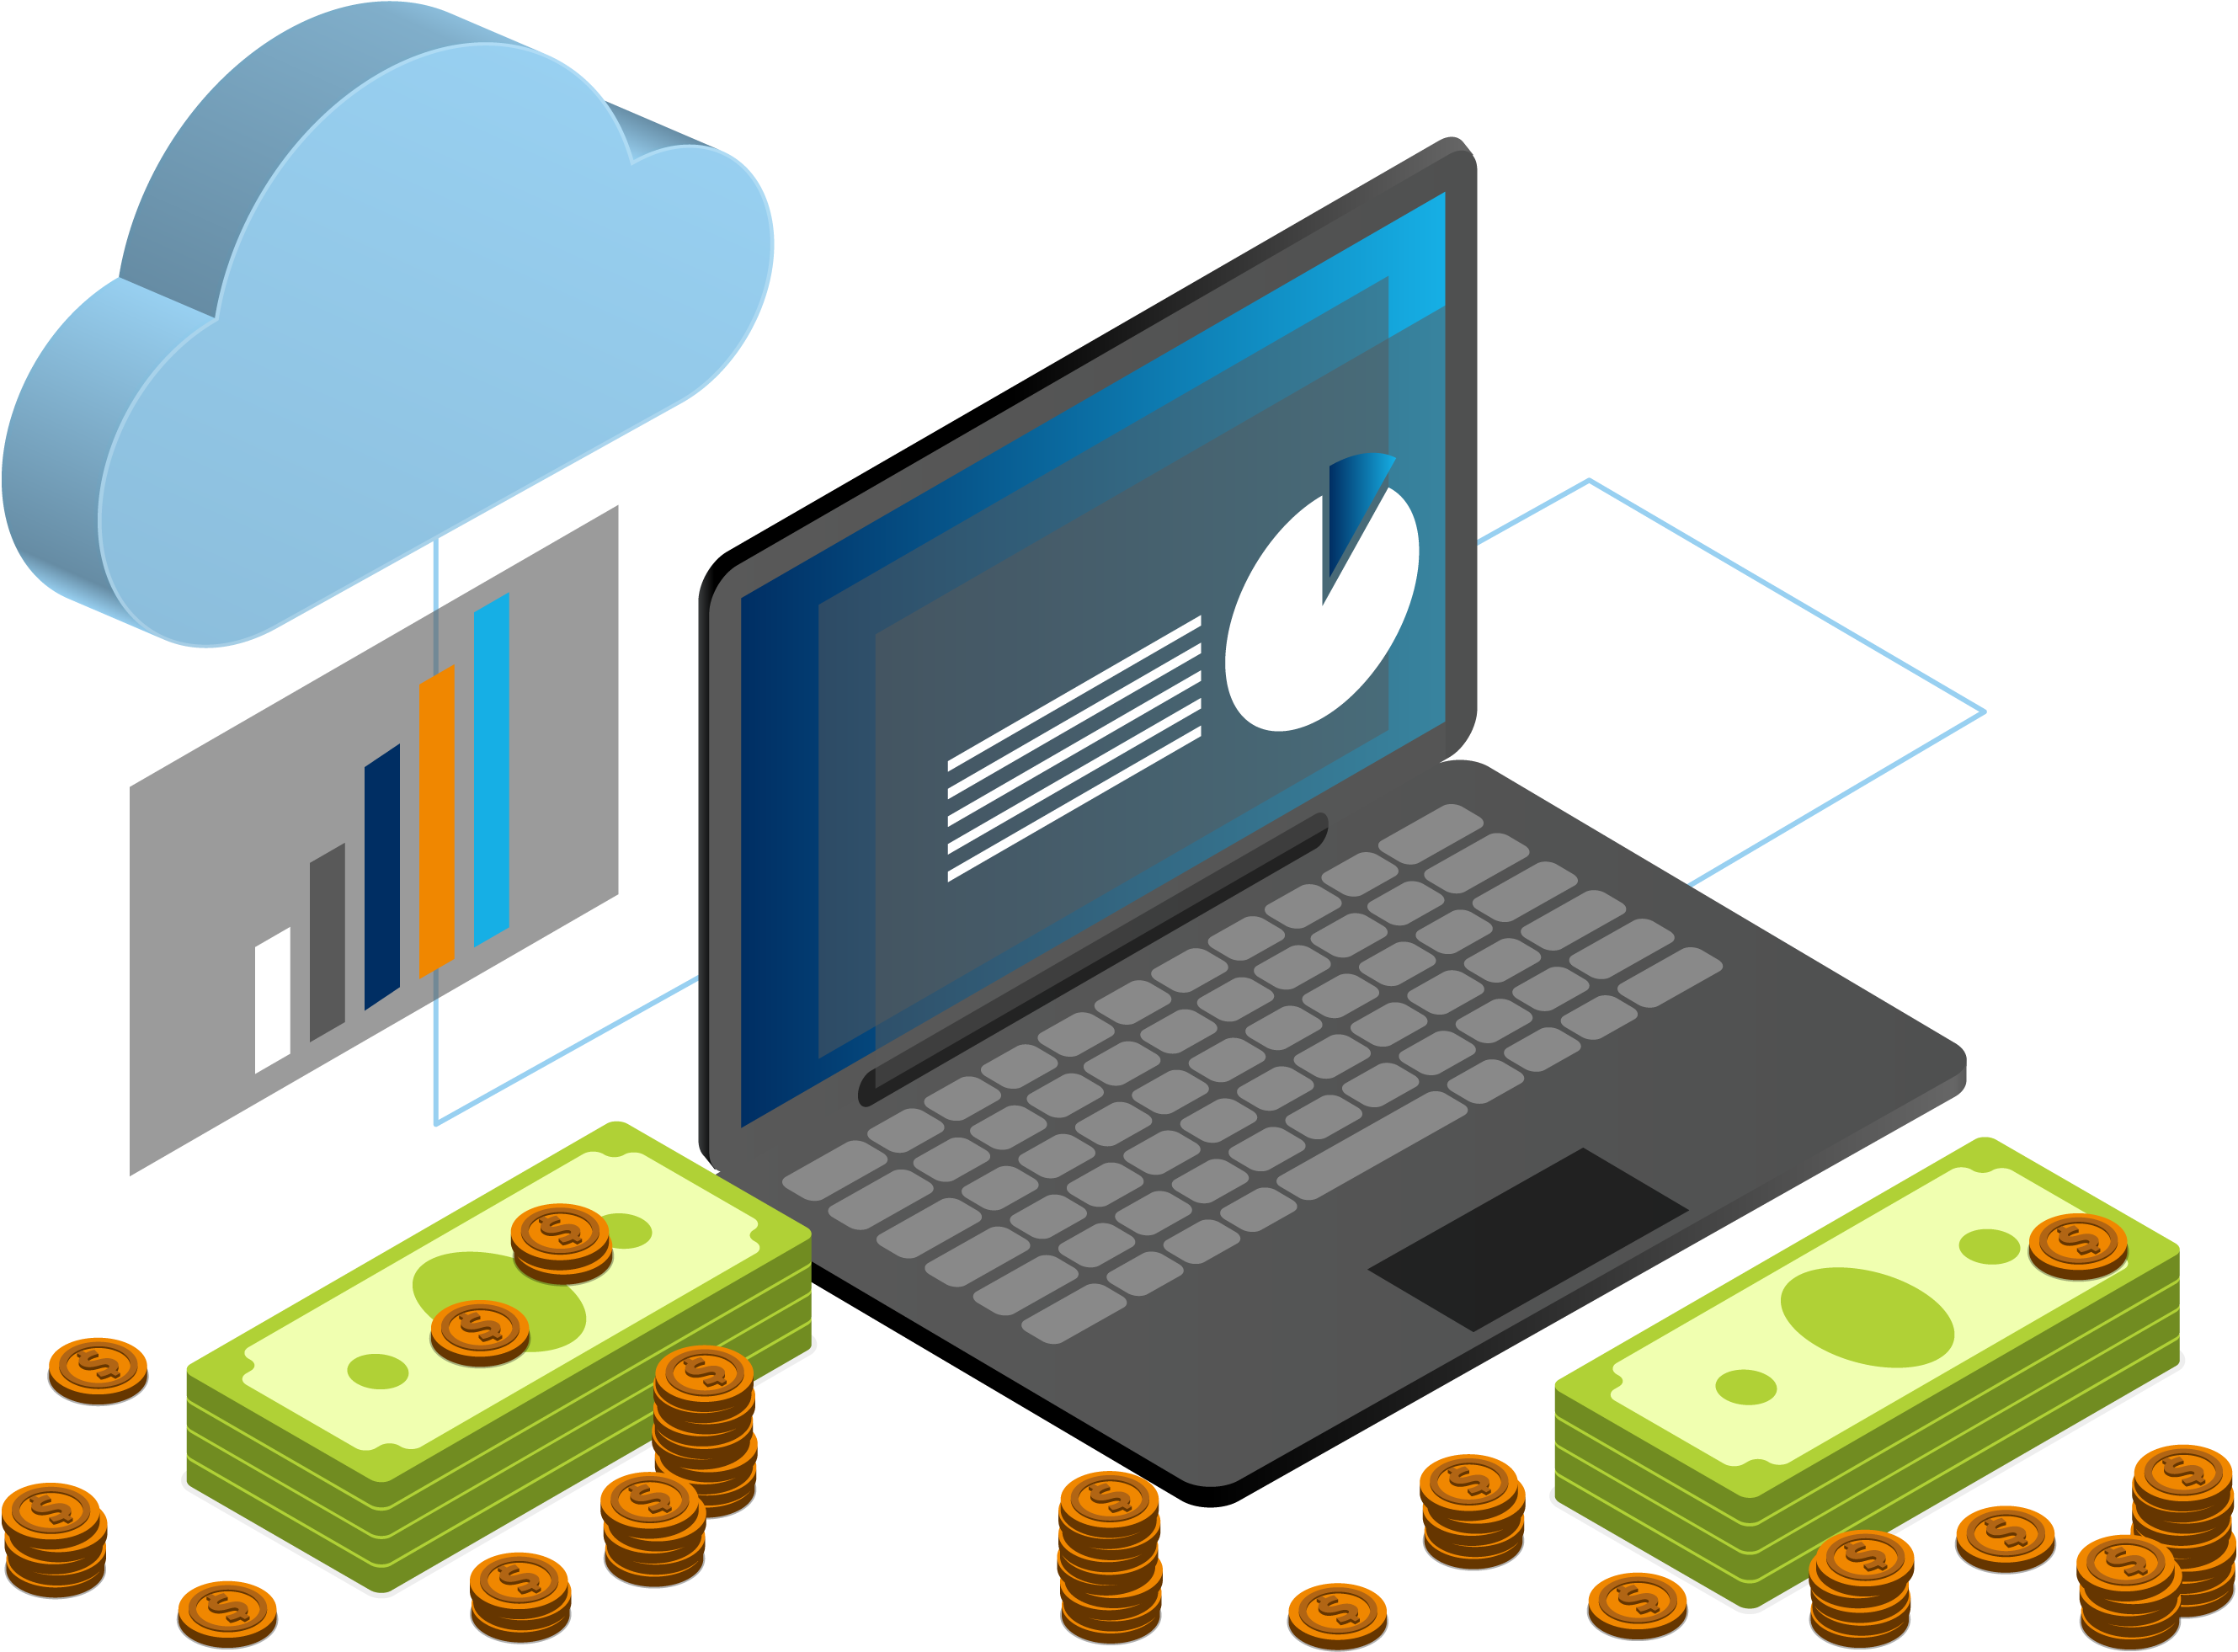 Graphic illustration of a computer with money